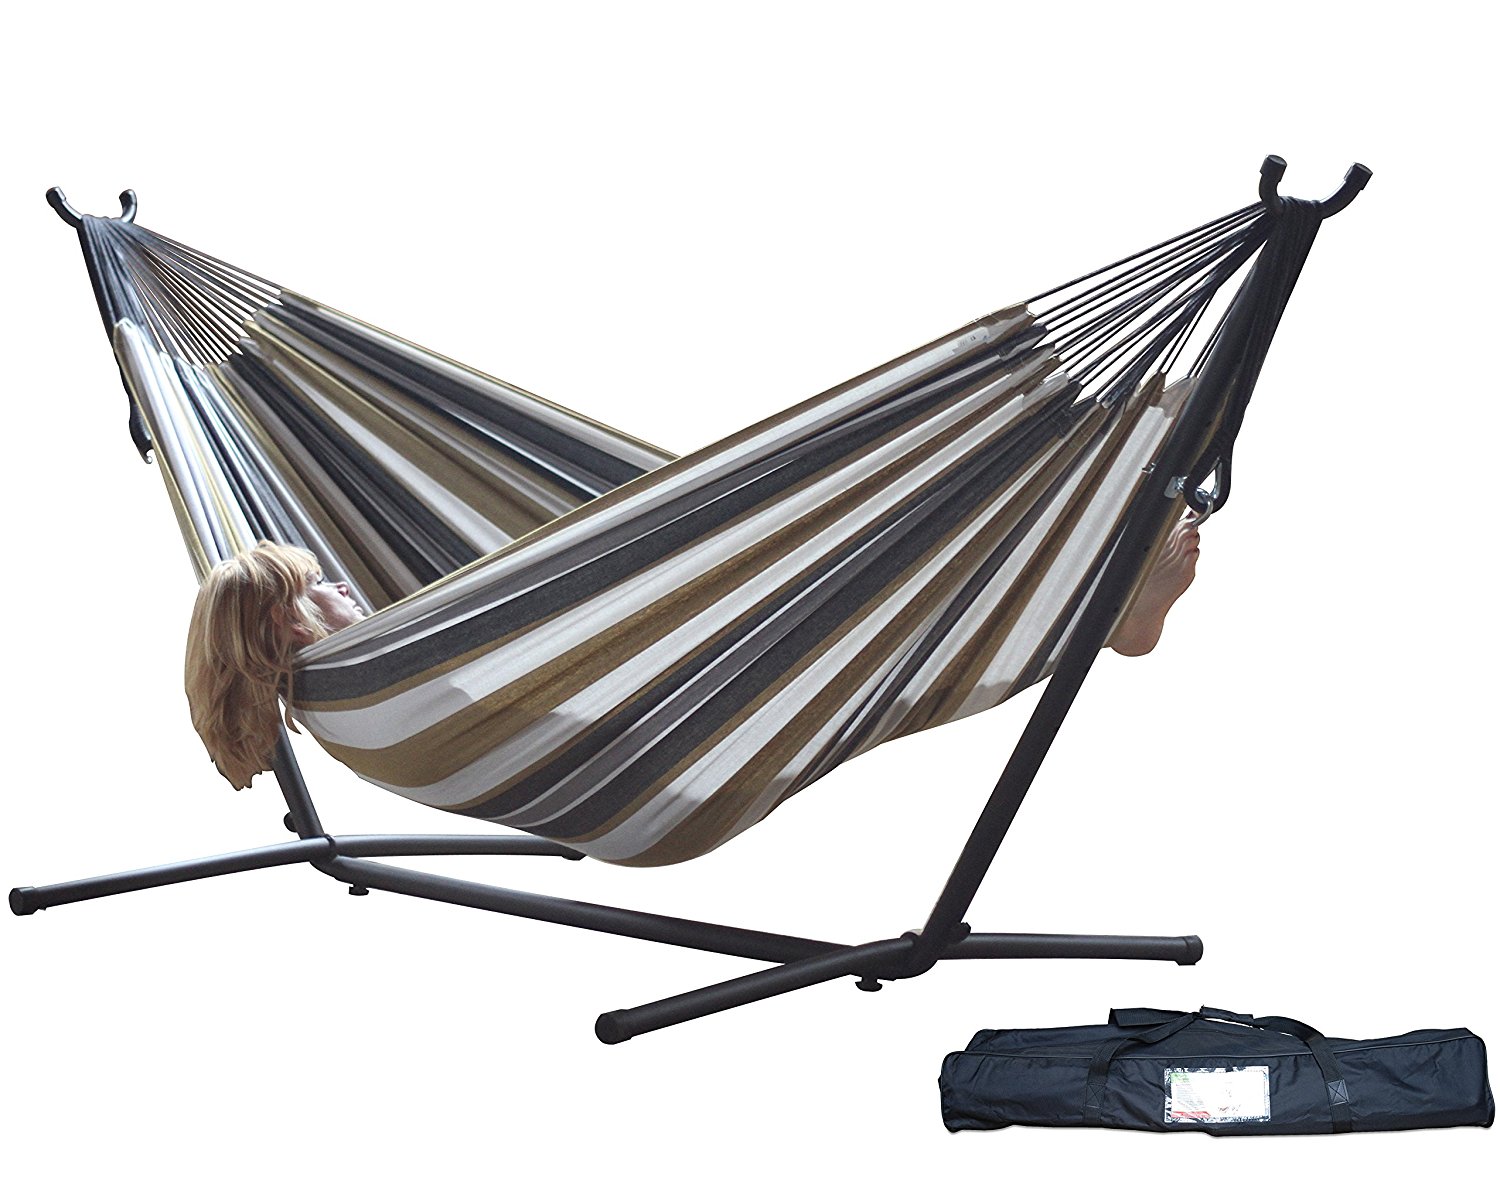 Prime Day Deal – Vivere Double Hammock with Space Saving Steel Stand – Just $79.98!